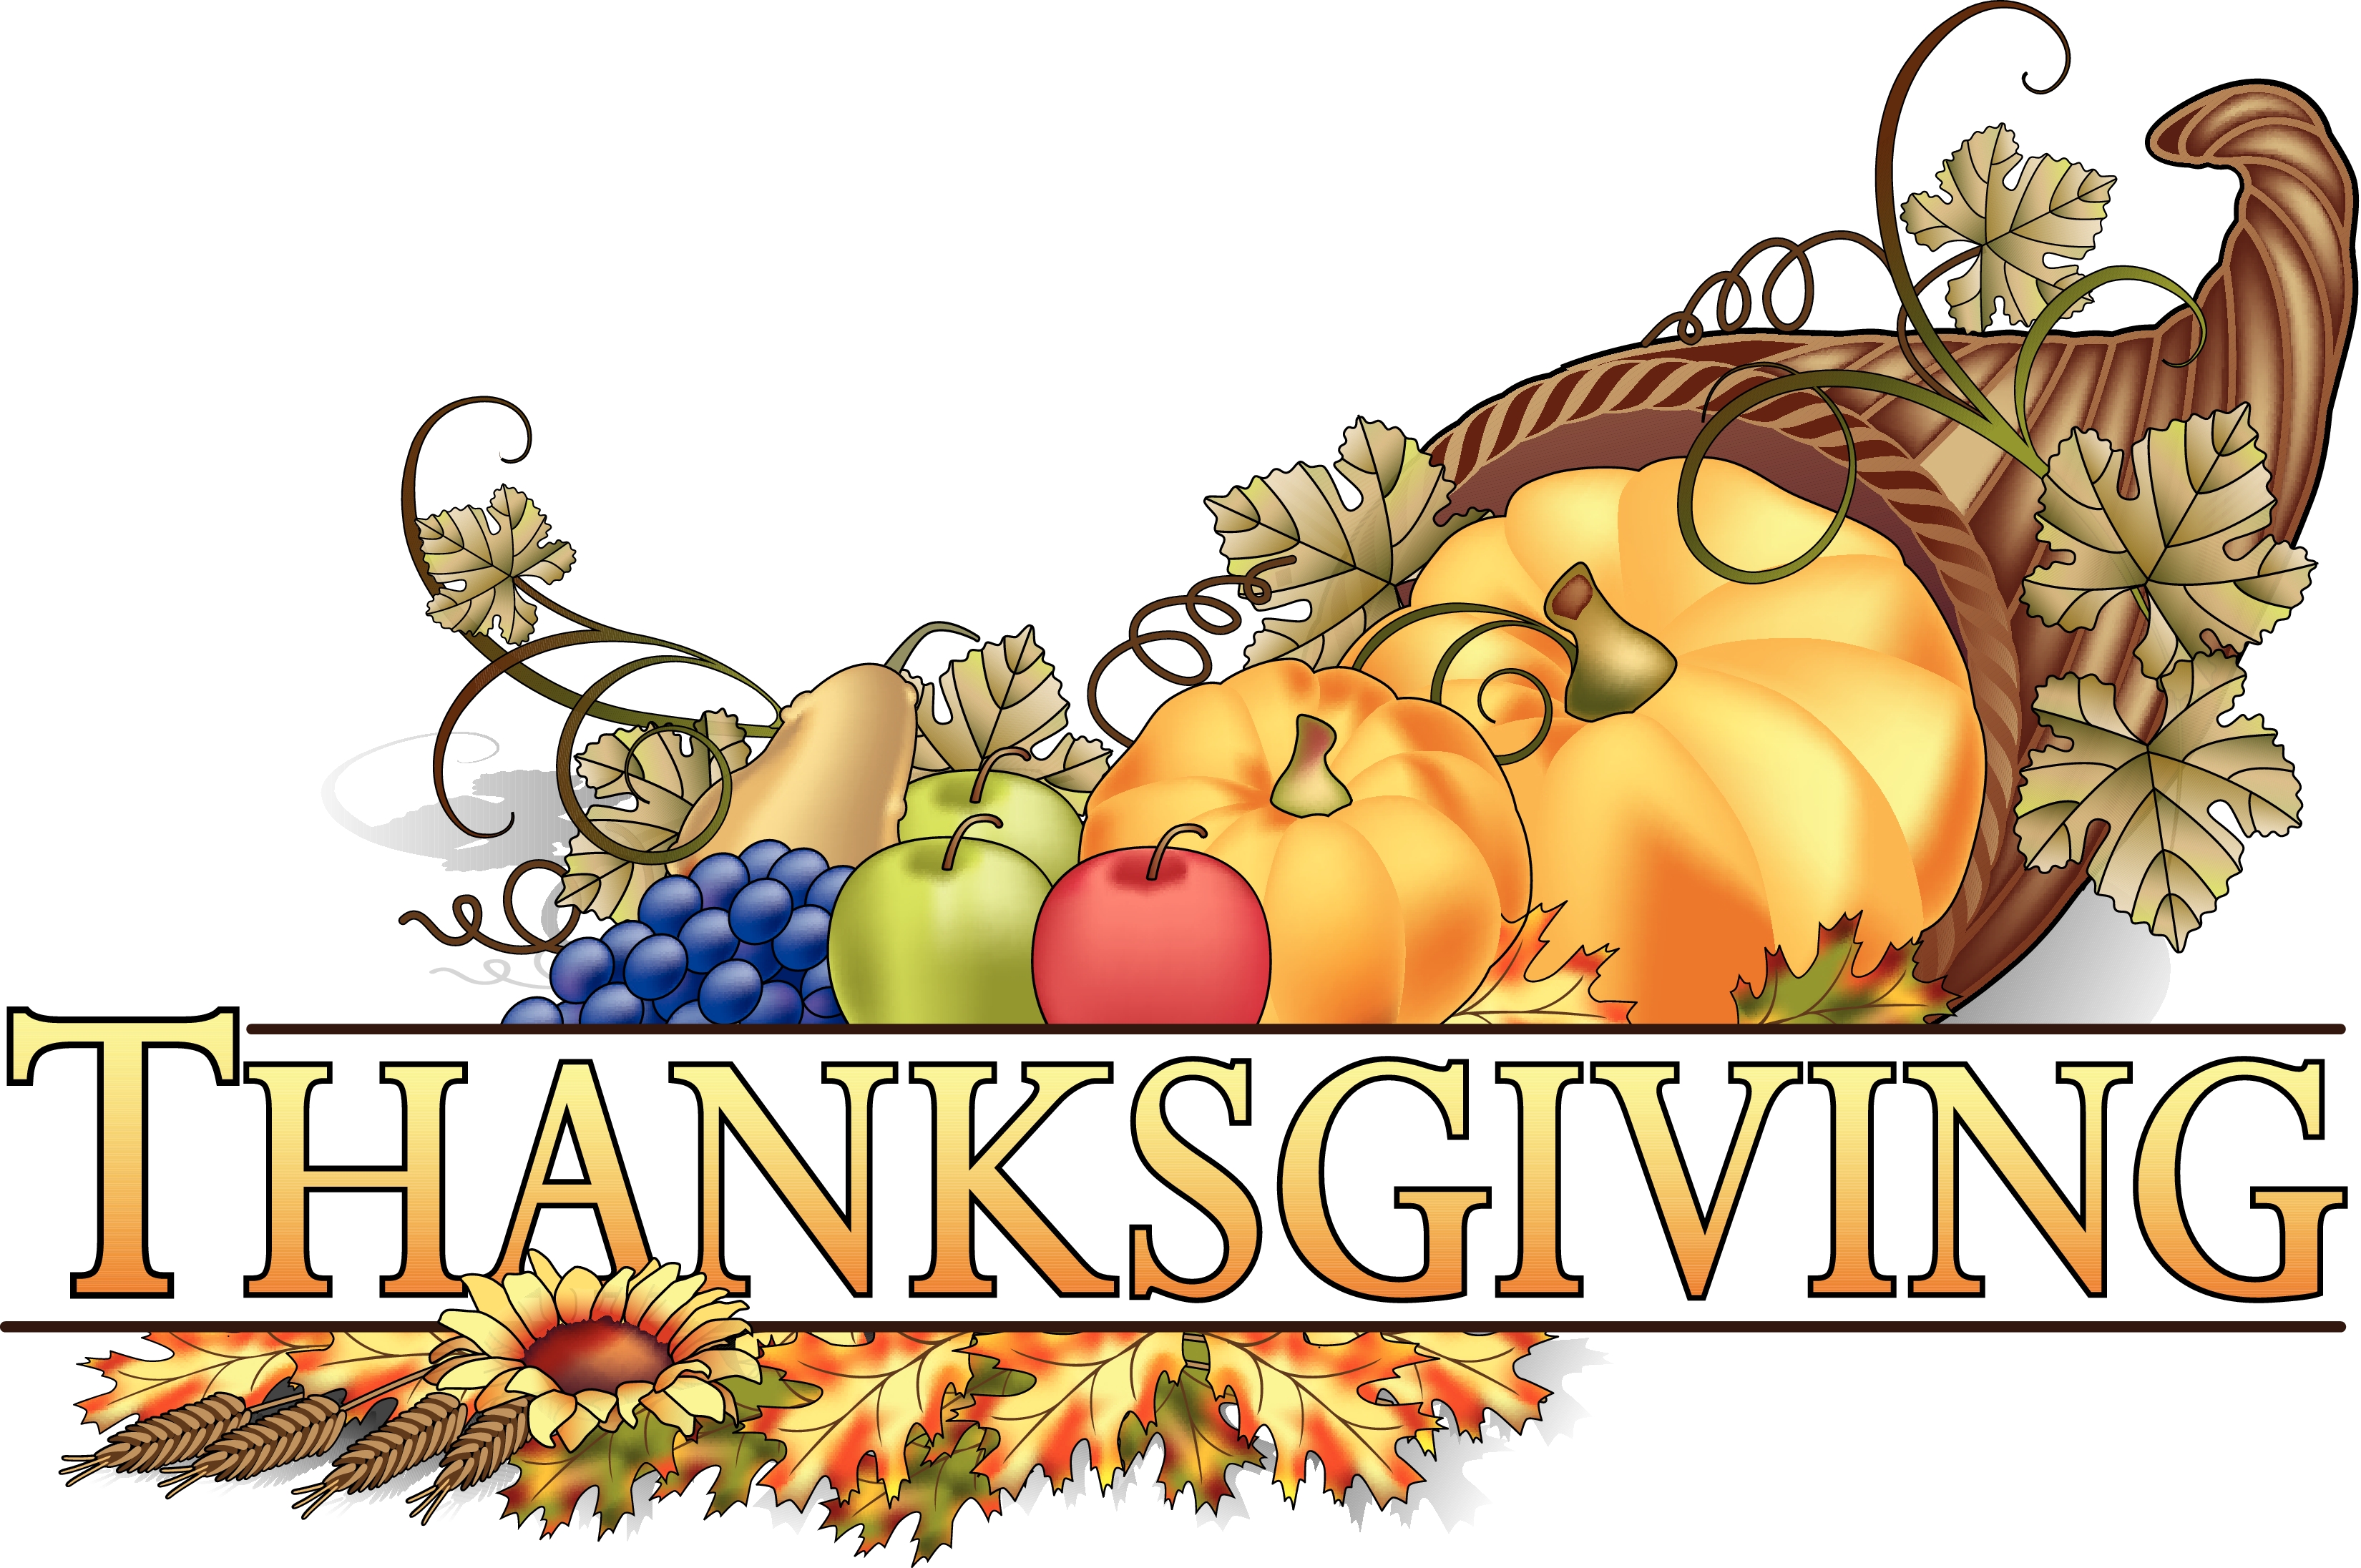 Thanksgiving Meaning In English